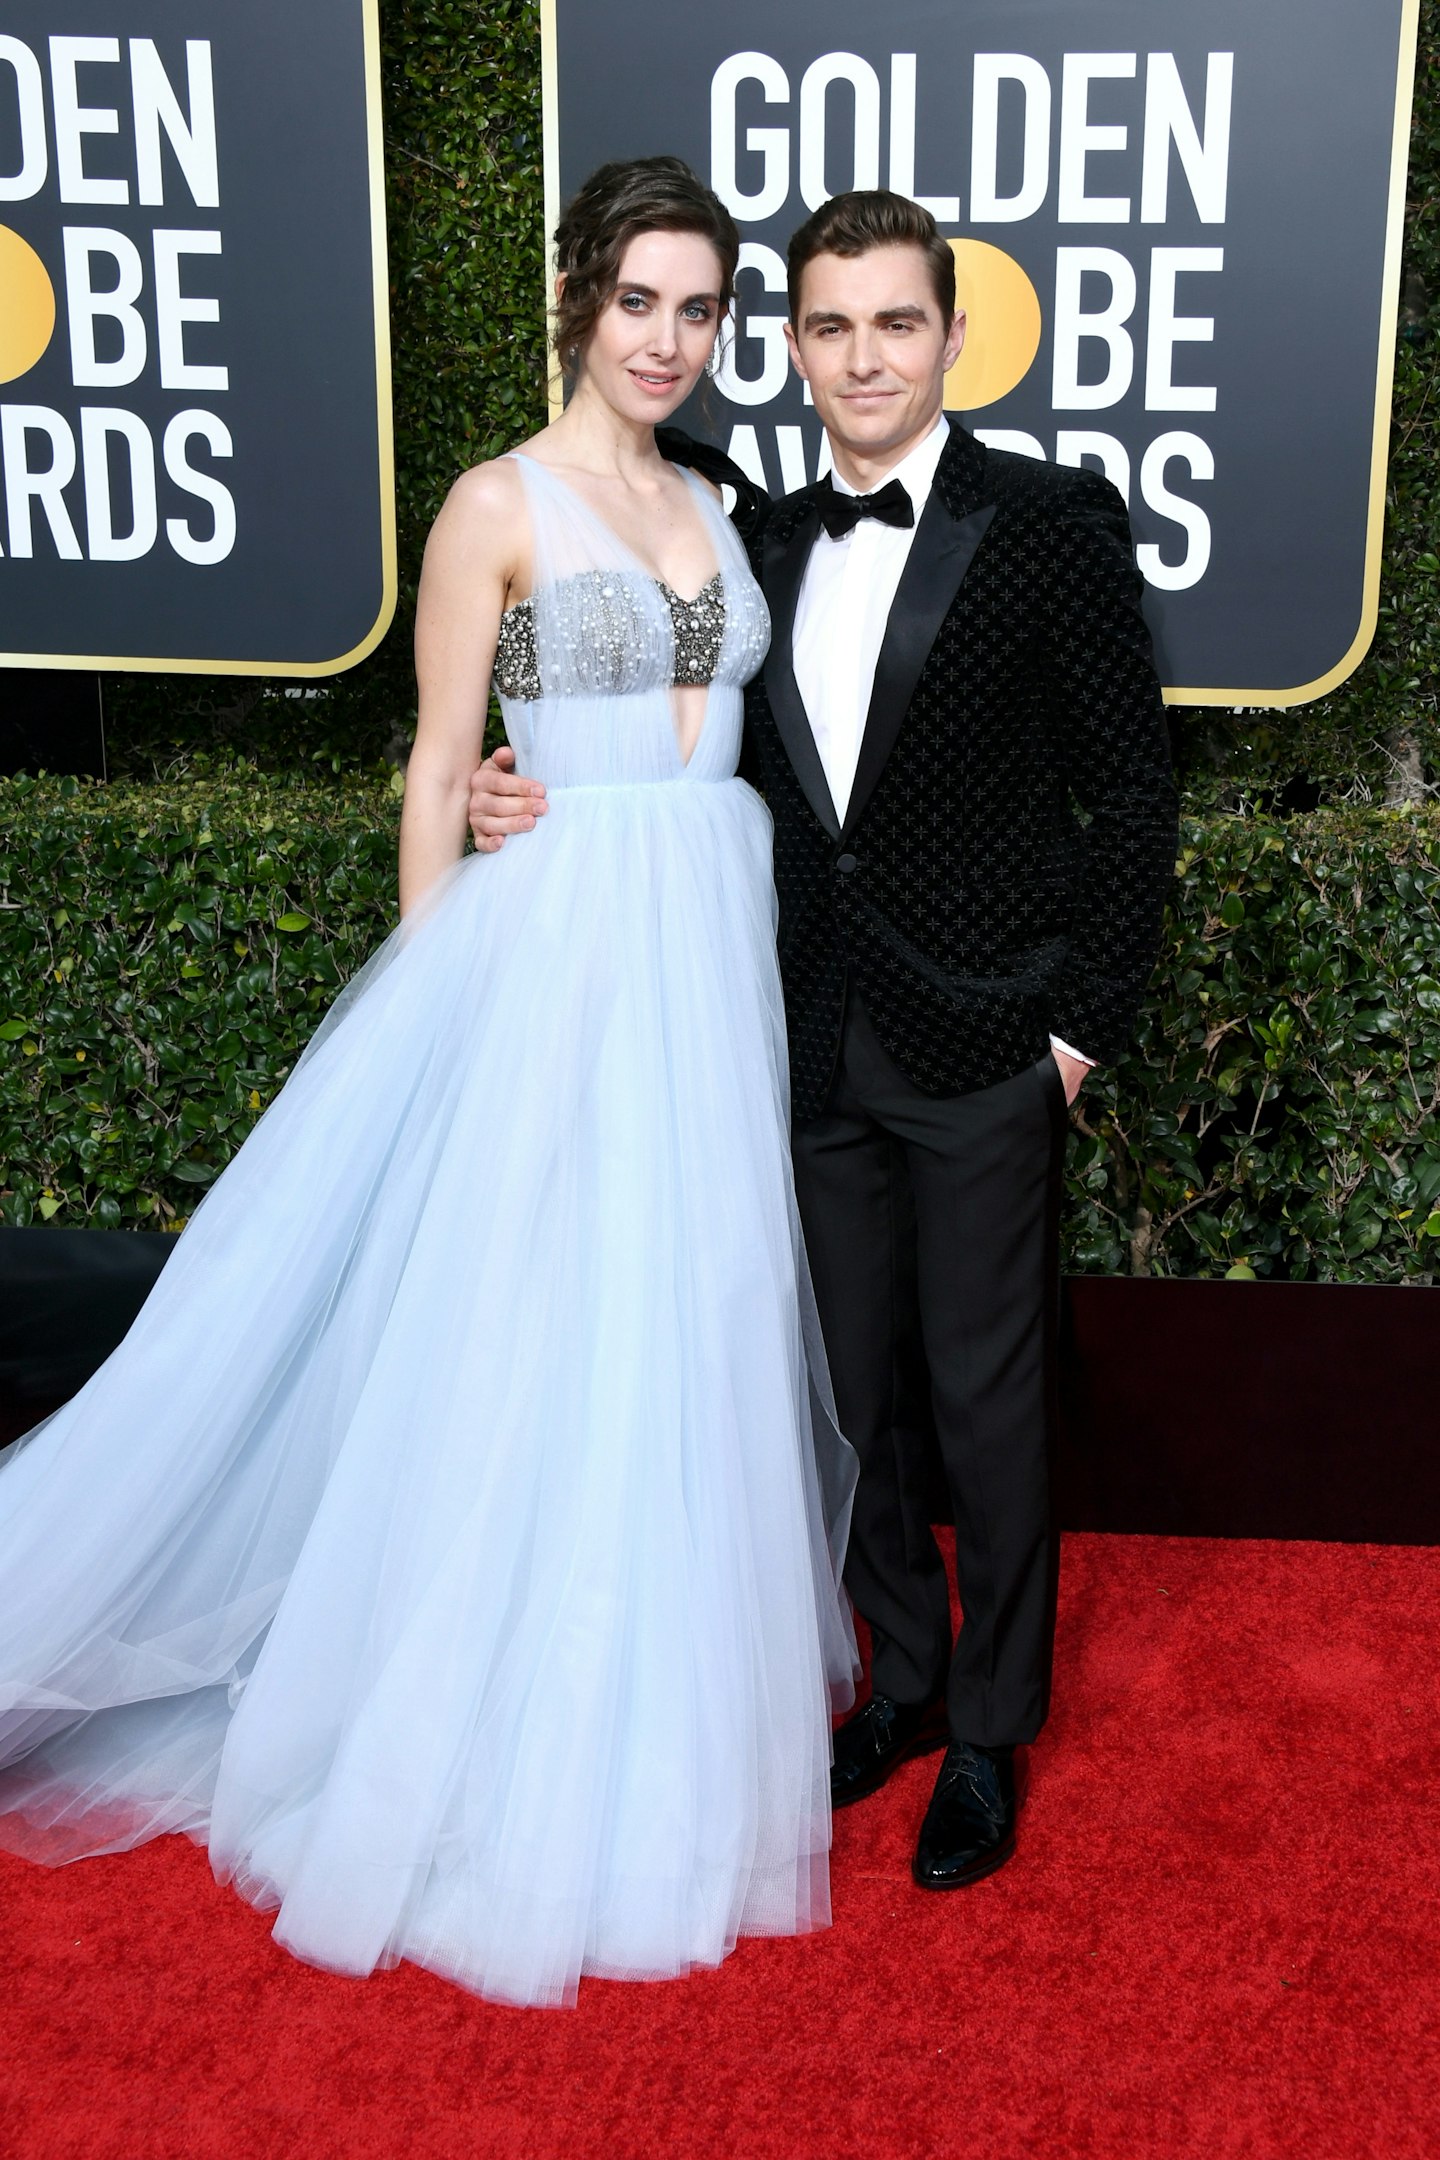 Alison Brie and Dave Franco at the 2019 Golden Globes